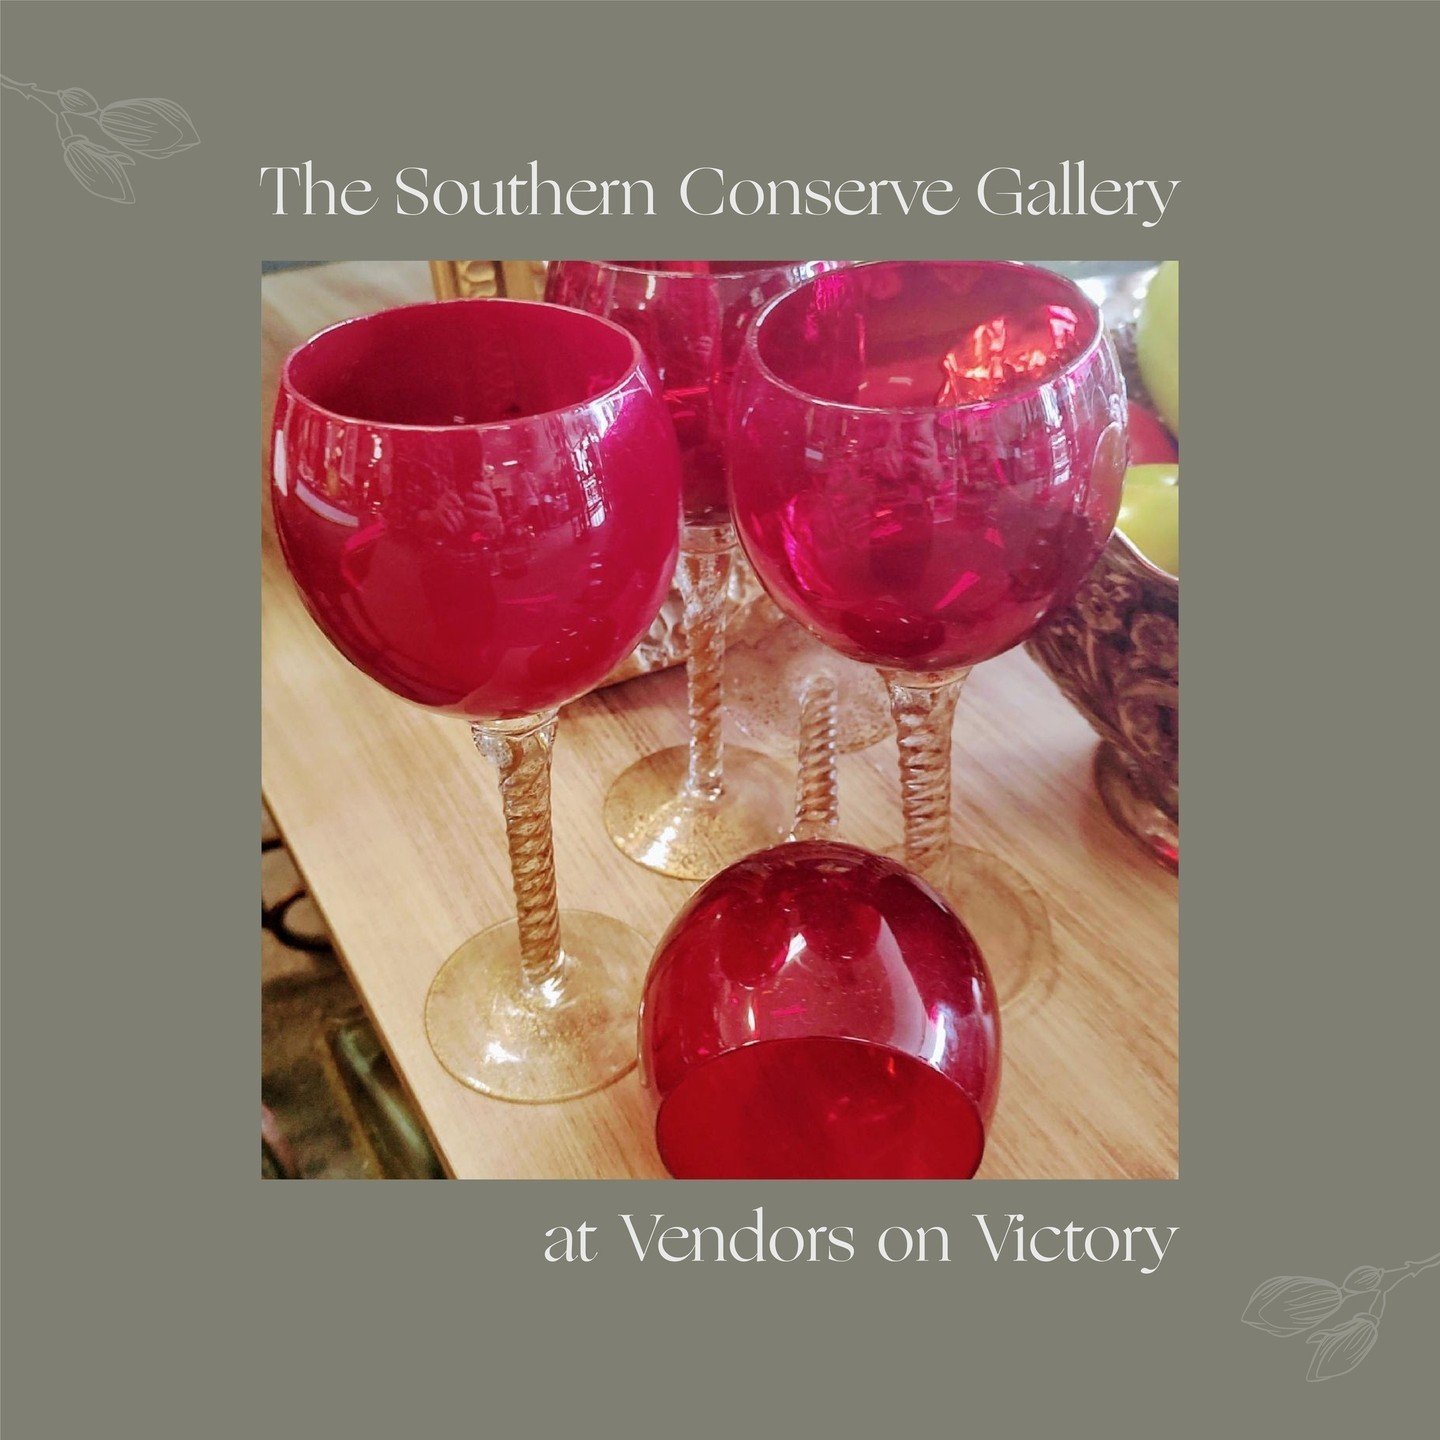 Did you know we have a booth at Vendor&rsquo;s on Victory? Visit The Southern Conserve Gallery at 2123 E Victory Drive in Savannah!⁠
⁠
❤️ This week's featured product: ❤️ Imagine the early uncertain days of WW2 when Europe was in chaos. The Venetian 